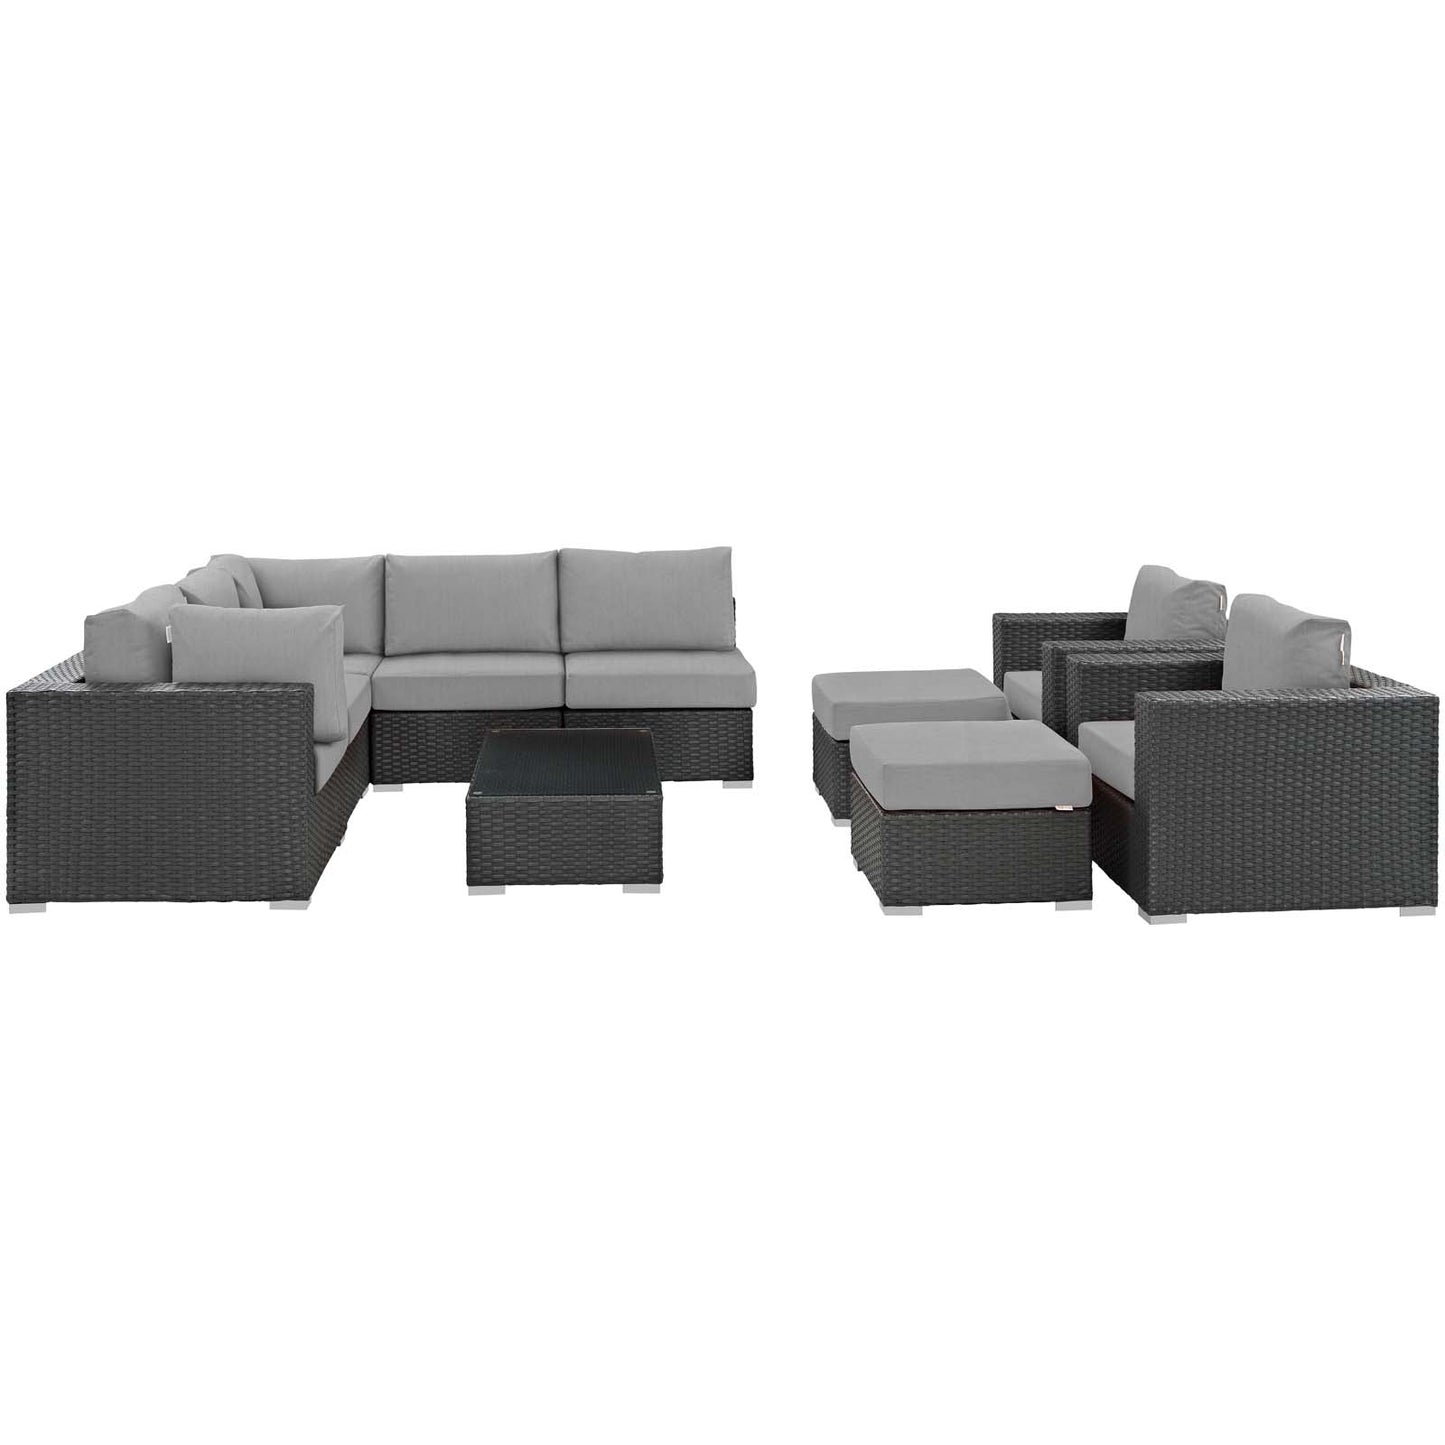 Sojourn 10 Piece Outdoor Patio Sunbrella® Sectional Set Canvas Gray EEI-1888-CHC-GRY-SET